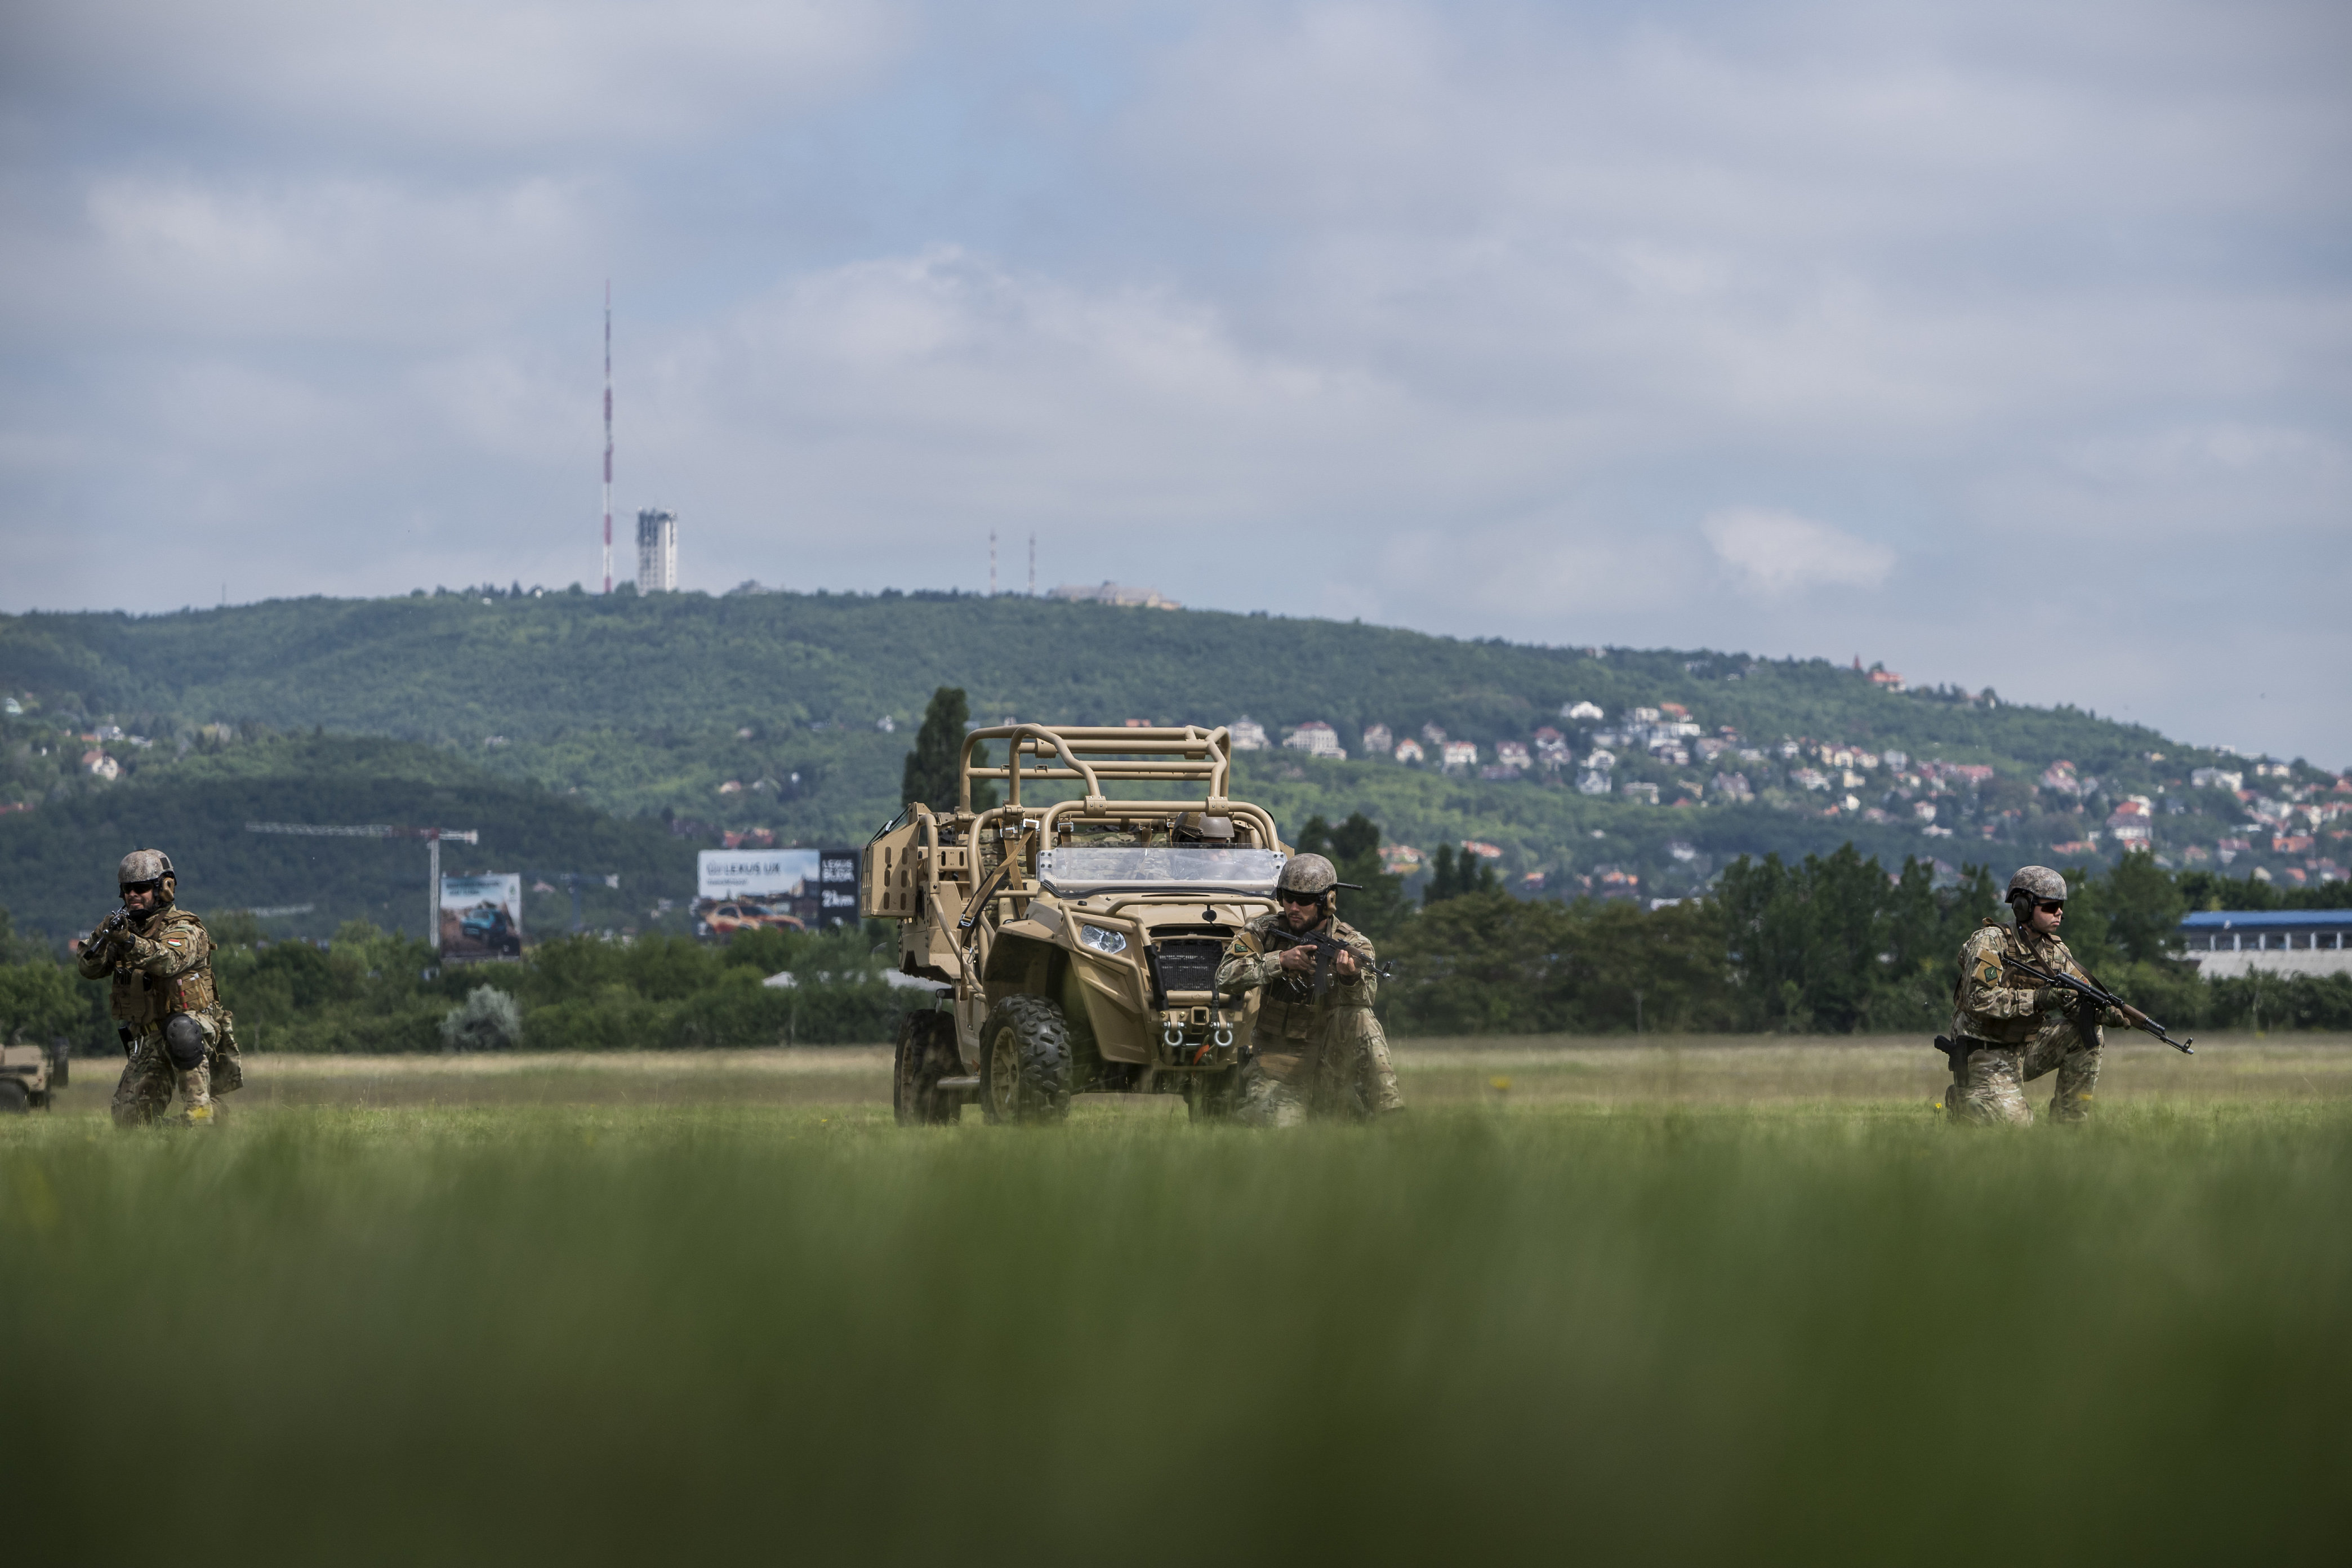 Hungary is set to increase its role in international military missions